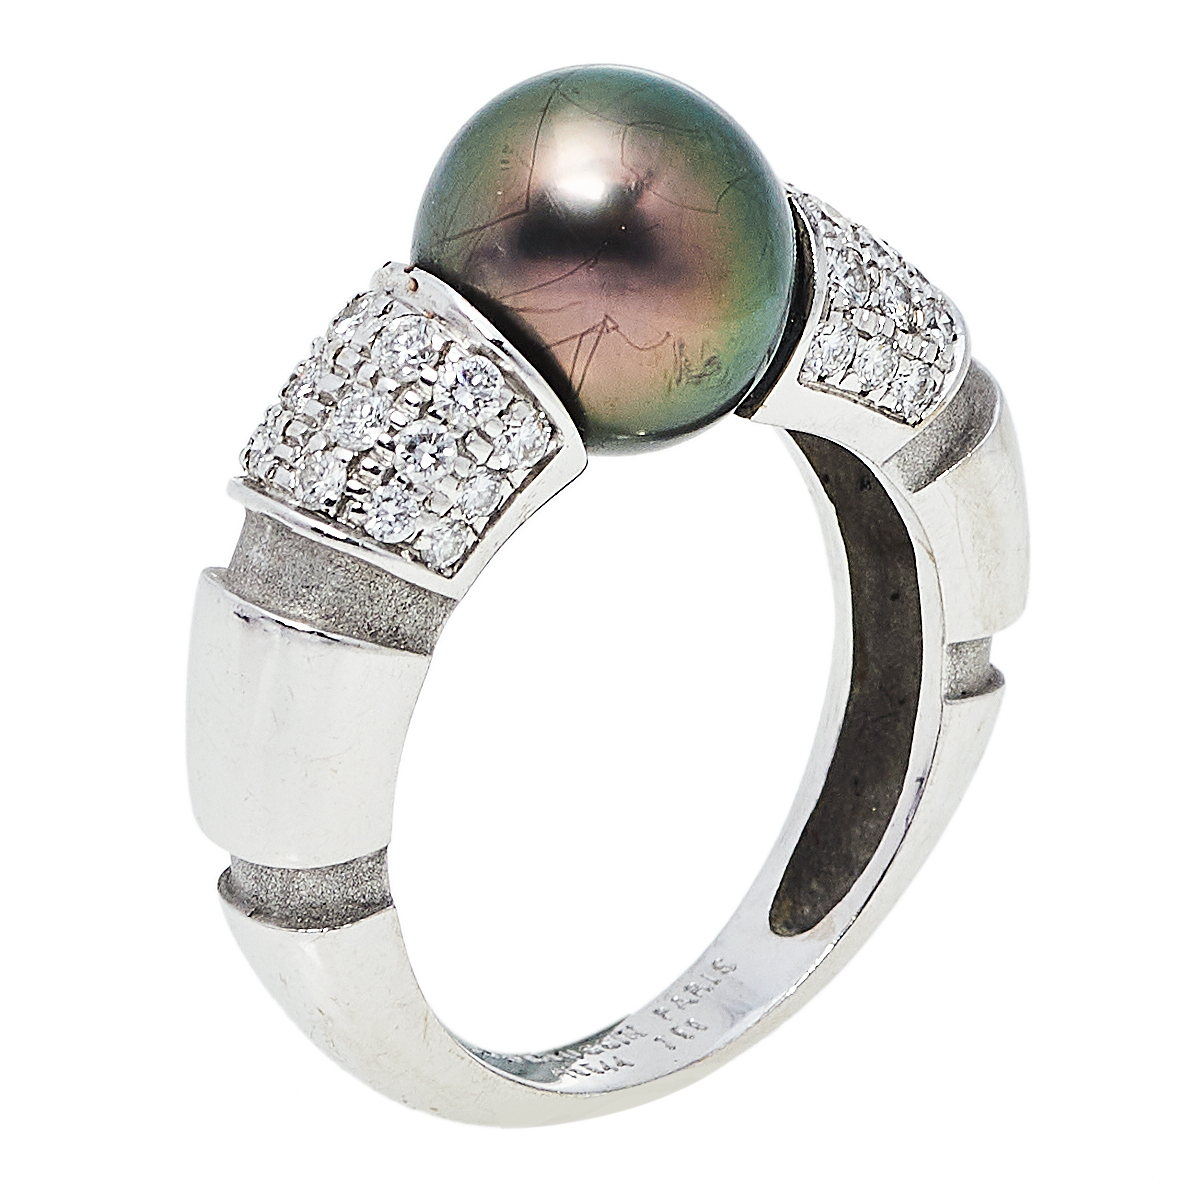 Mauboussin Nadja Cultured Pearl Diamond 18K White Gold Cocktail Ring Size 52